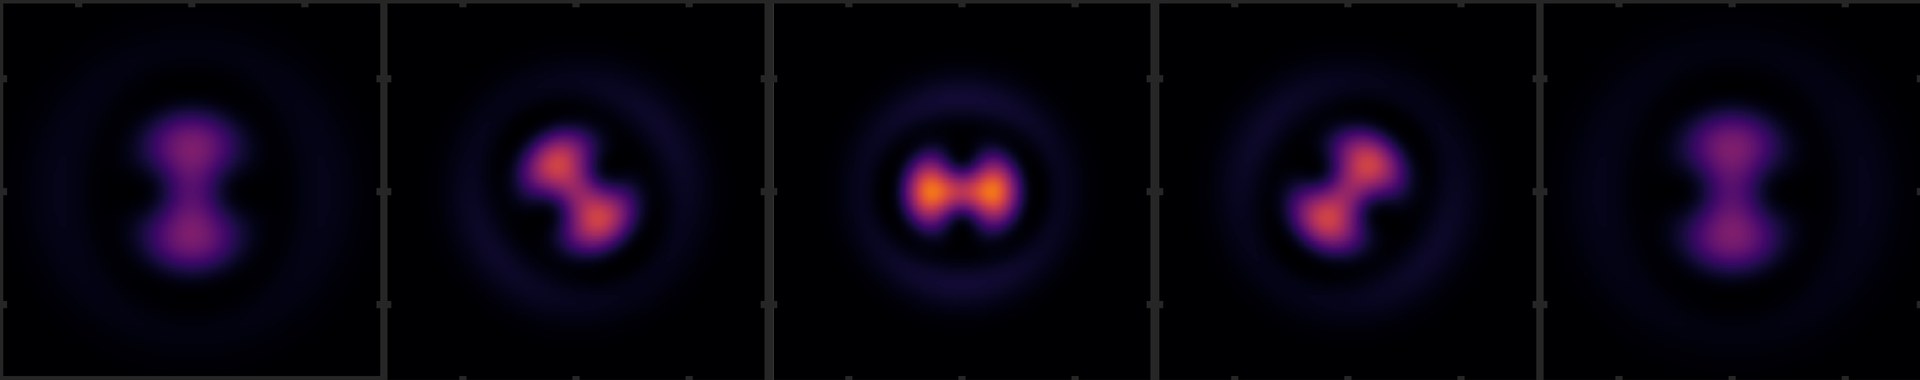 The image of an atom produced by a quantum gas microscope